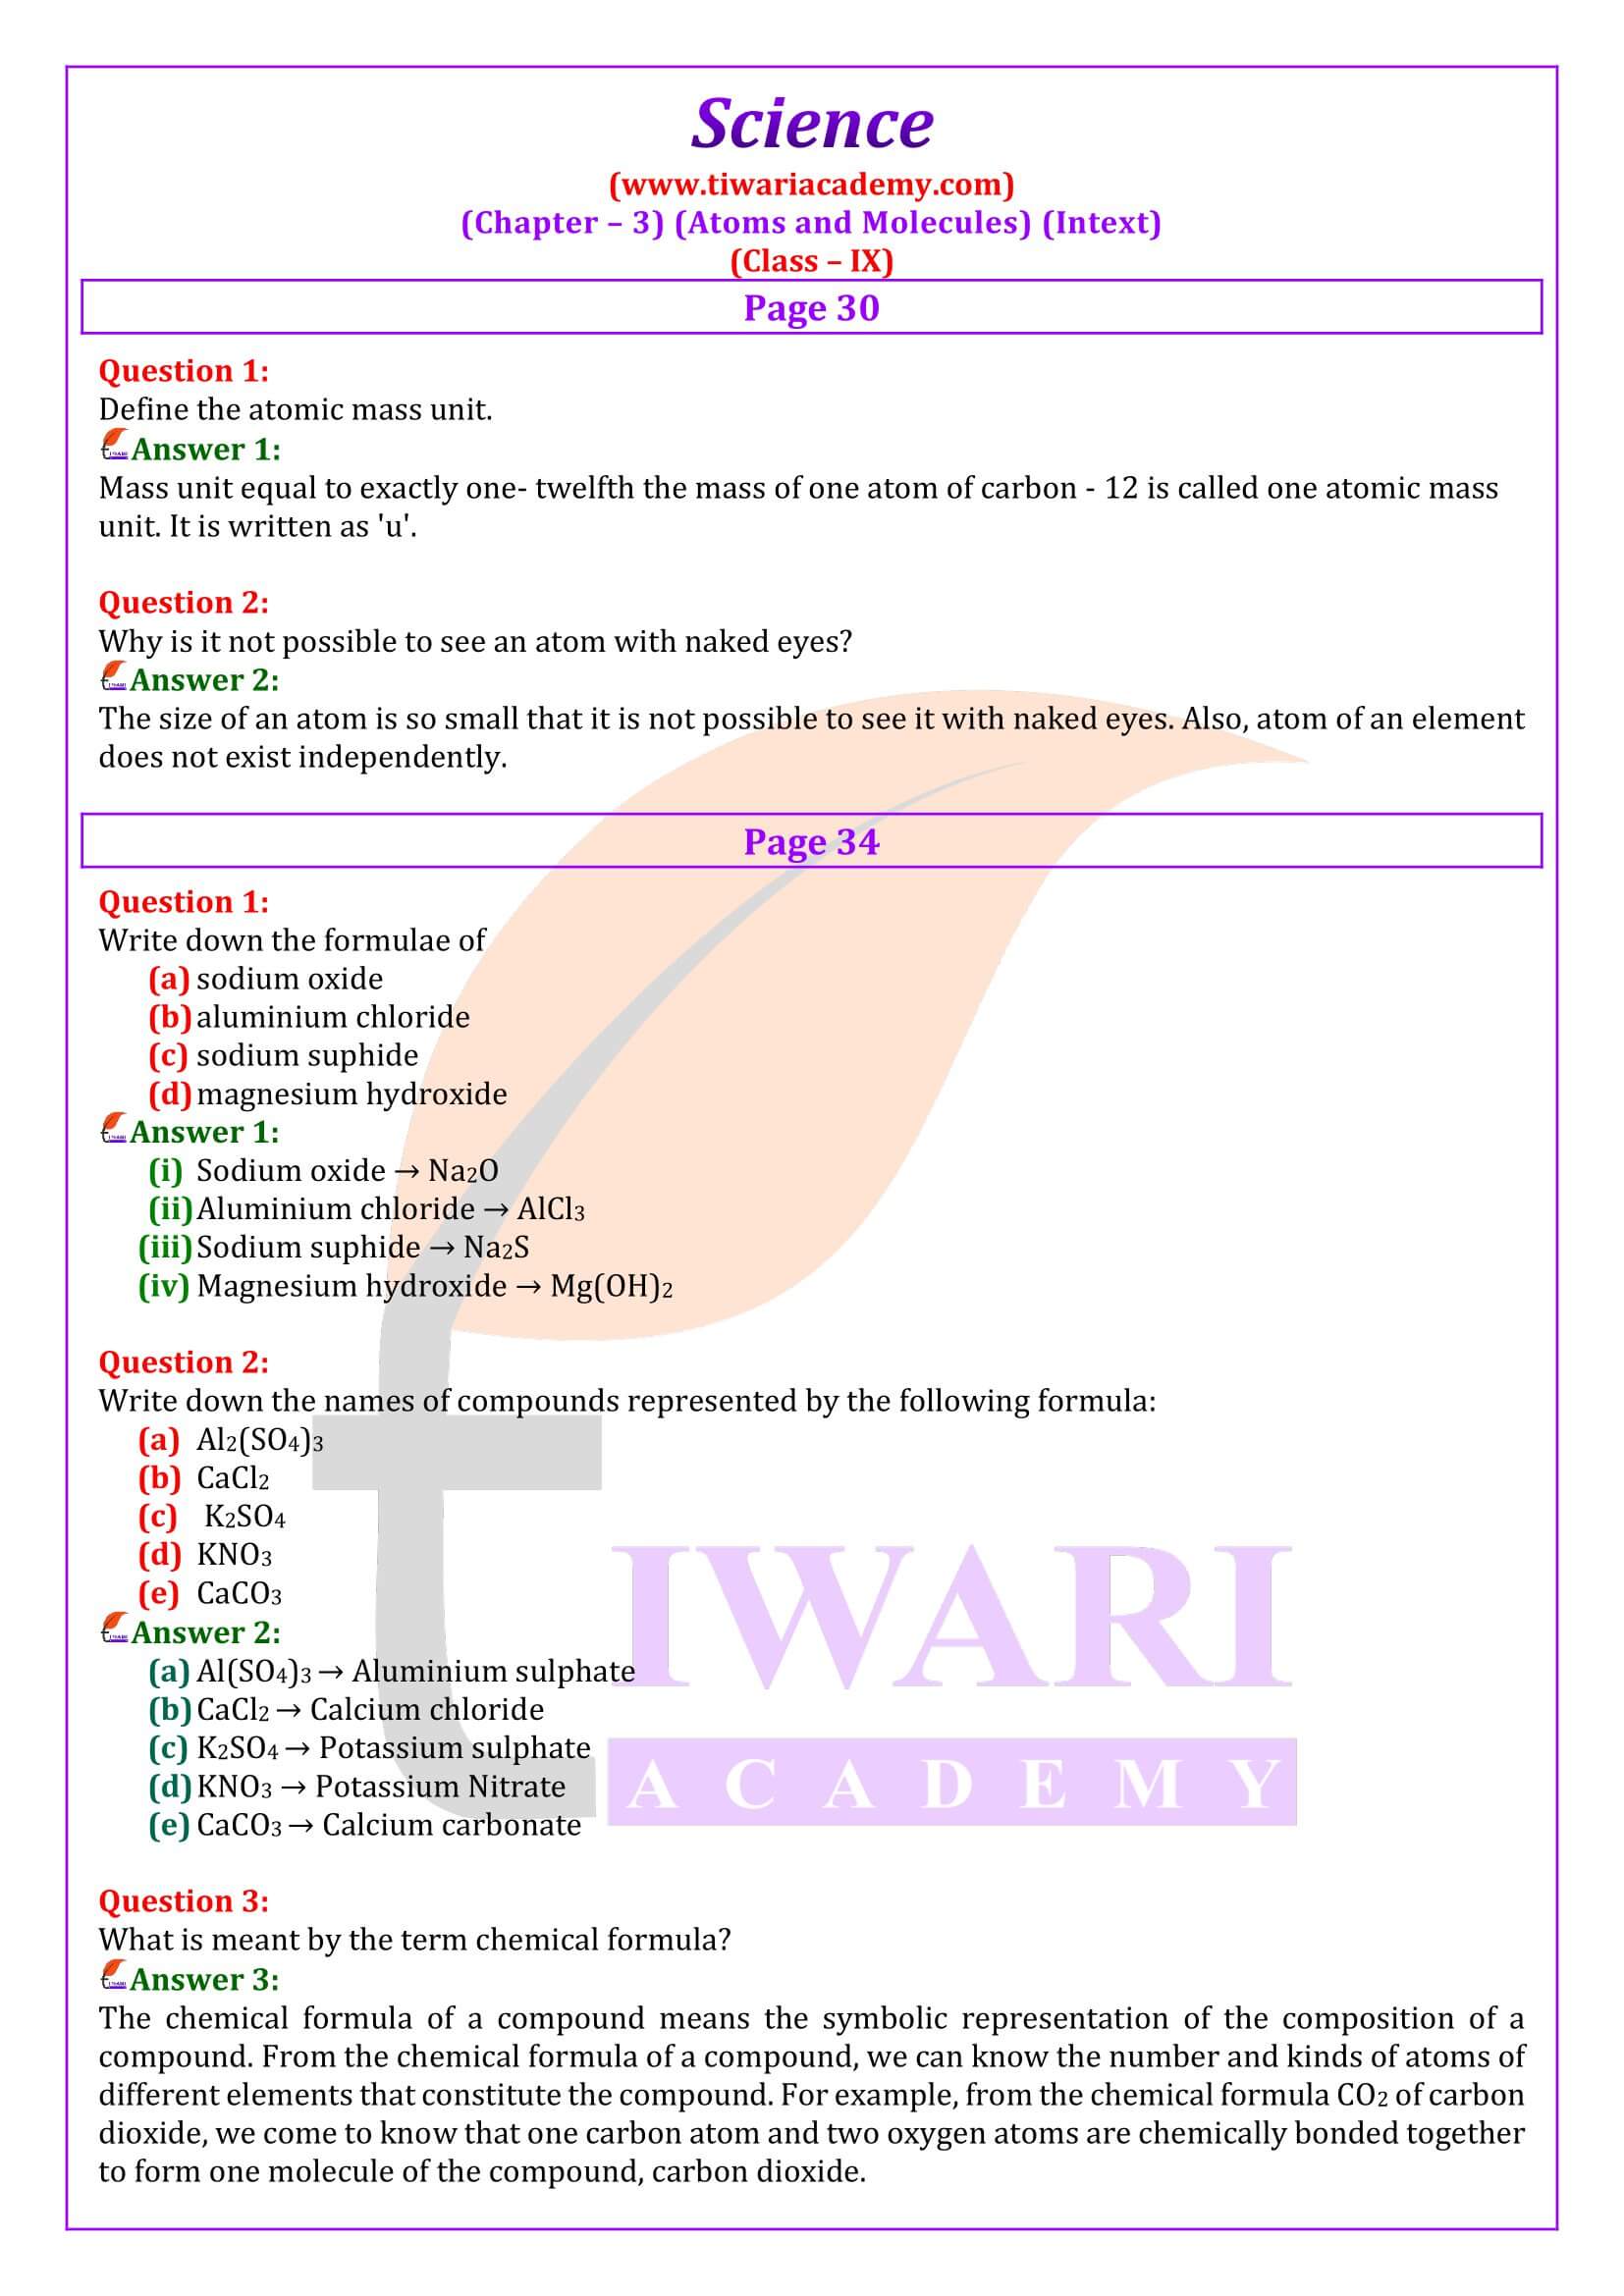 NCERT Solutions for Class 9 Science Chapter 3 Intext Answers